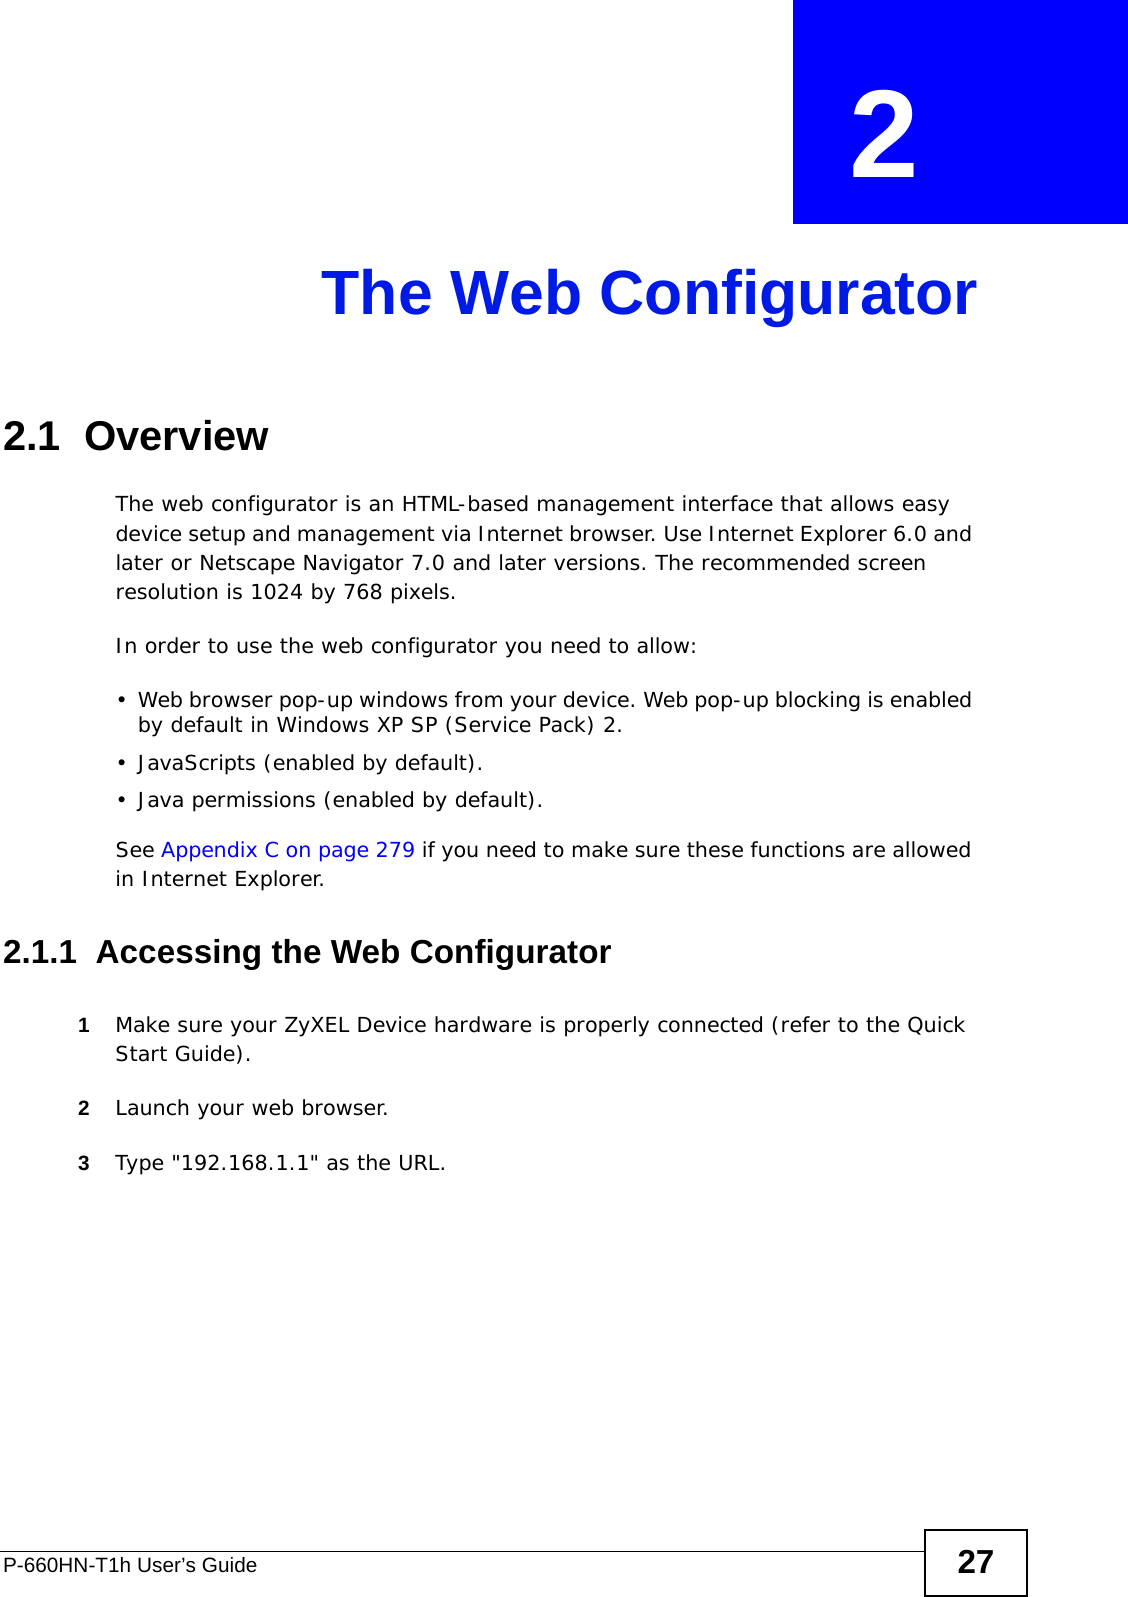 P-660HN-T1h User’s Guide 27CHAPTER  2 The Web Configurator2.1  OverviewThe web configurator is an HTML-based management interface that allows easy device setup and management via Internet browser. Use Internet Explorer 6.0 and later or Netscape Navigator 7.0 and later versions. The recommended screen resolution is 1024 by 768 pixels.In order to use the web configurator you need to allow:• Web browser pop-up windows from your device. Web pop-up blocking is enabled by default in Windows XP SP (Service Pack) 2.• JavaScripts (enabled by default).• Java permissions (enabled by default).See Appendix C on page 279 if you need to make sure these functions are allowed in Internet Explorer.2.1.1  Accessing the Web Configurator1Make sure your ZyXEL Device hardware is properly connected (refer to the Quick Start Guide).2Launch your web browser.3Type &quot;192.168.1.1&quot; as the URL.